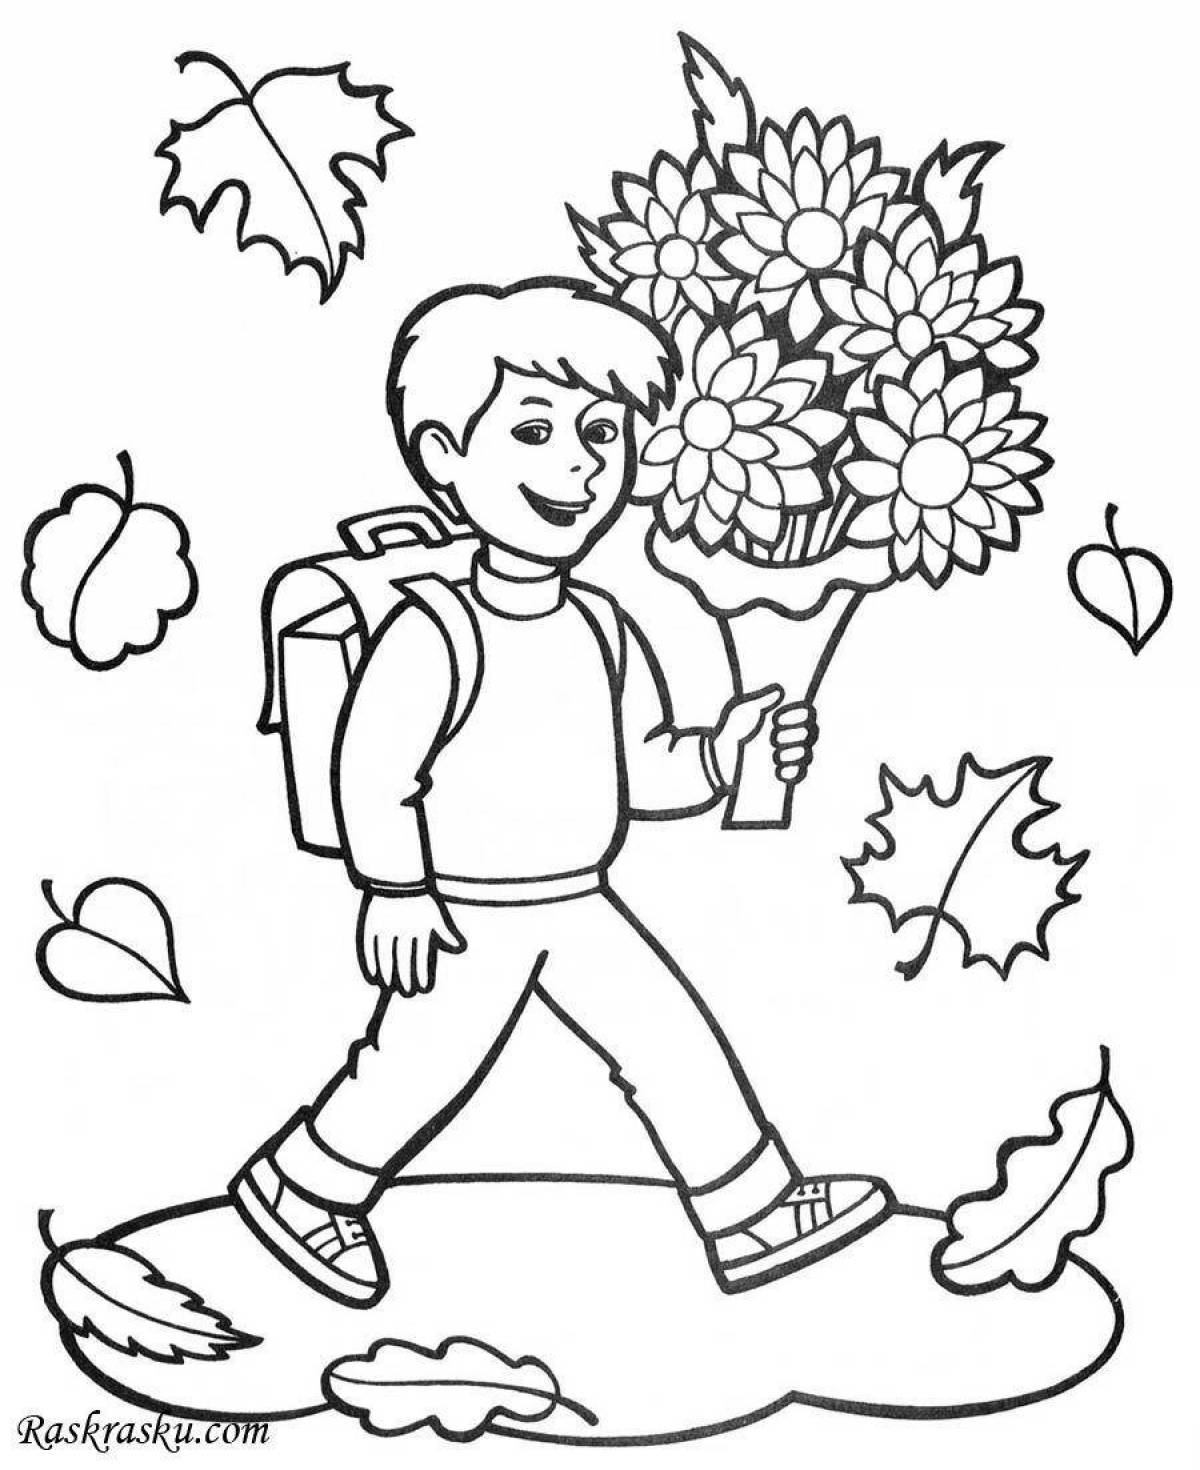 Adorable September coloring book for kids